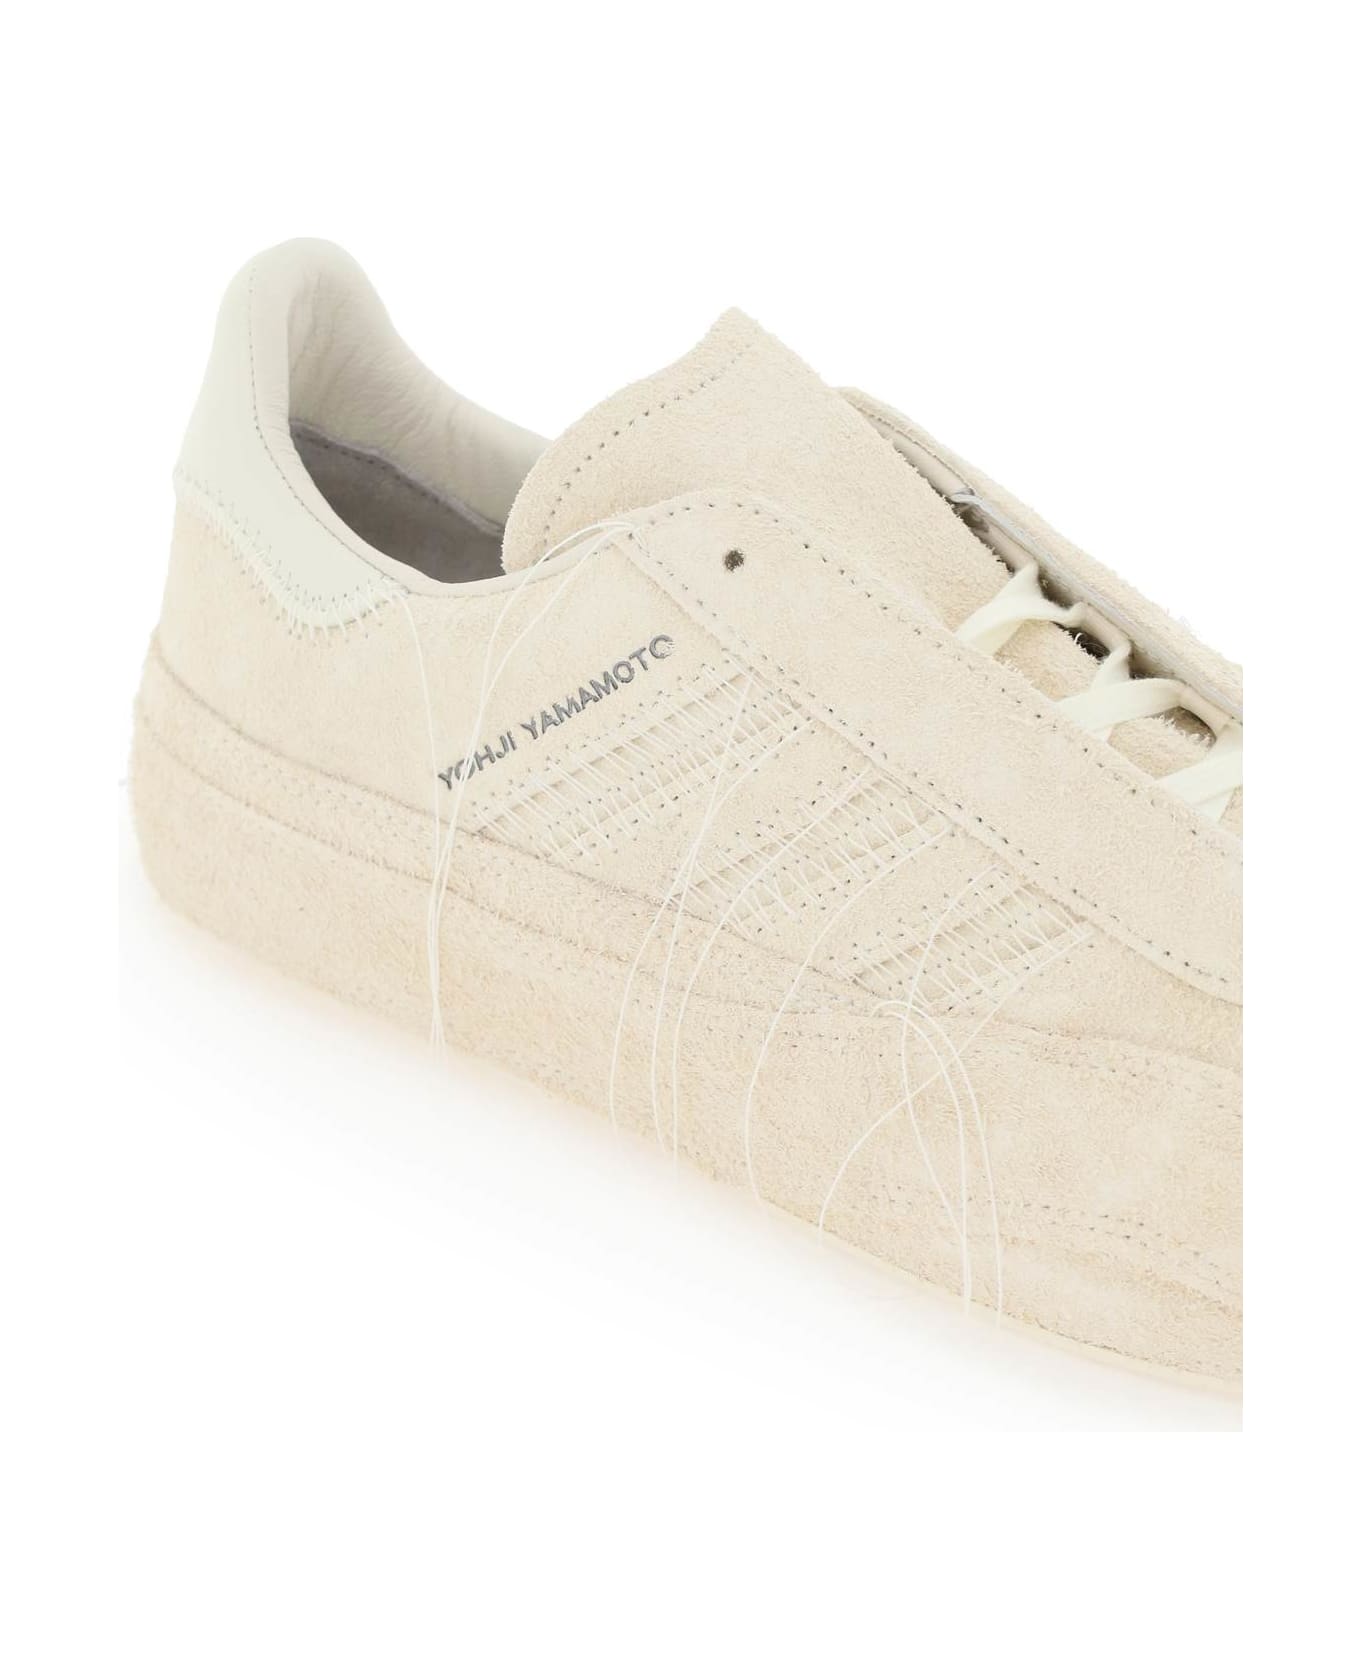 Y-3 Gazelle Ivory Suede Sneakers - White